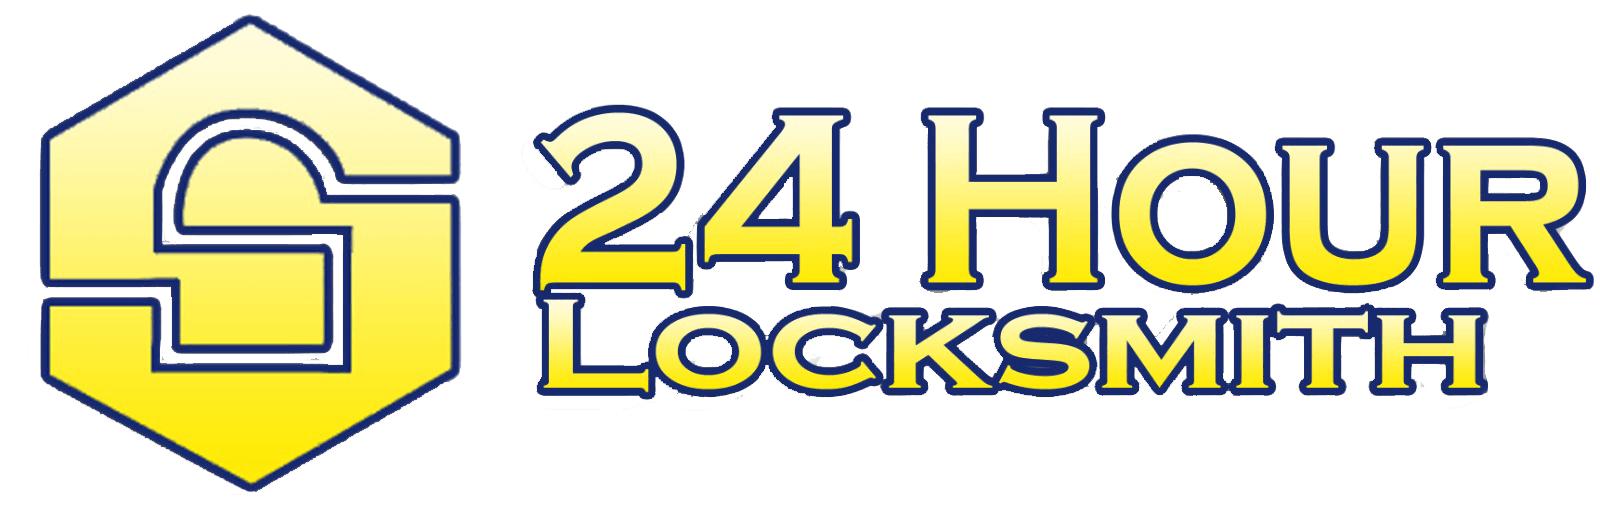 24 Hour Locksmith in Indianapolis, IN